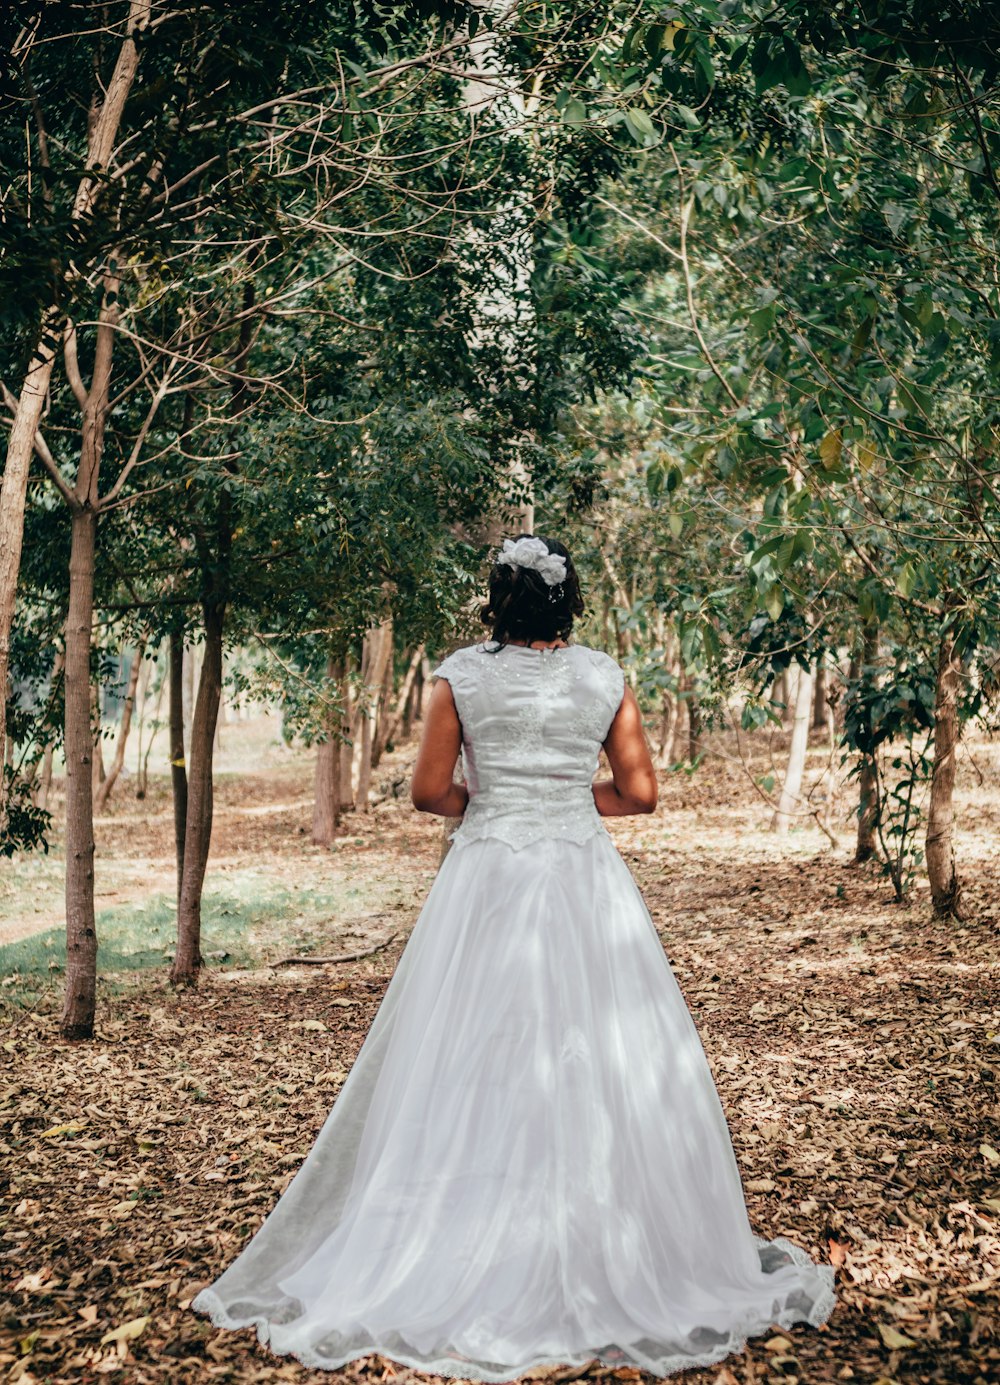 woman in white wedding dress standing on brown soil surrounded by green trees during daytime